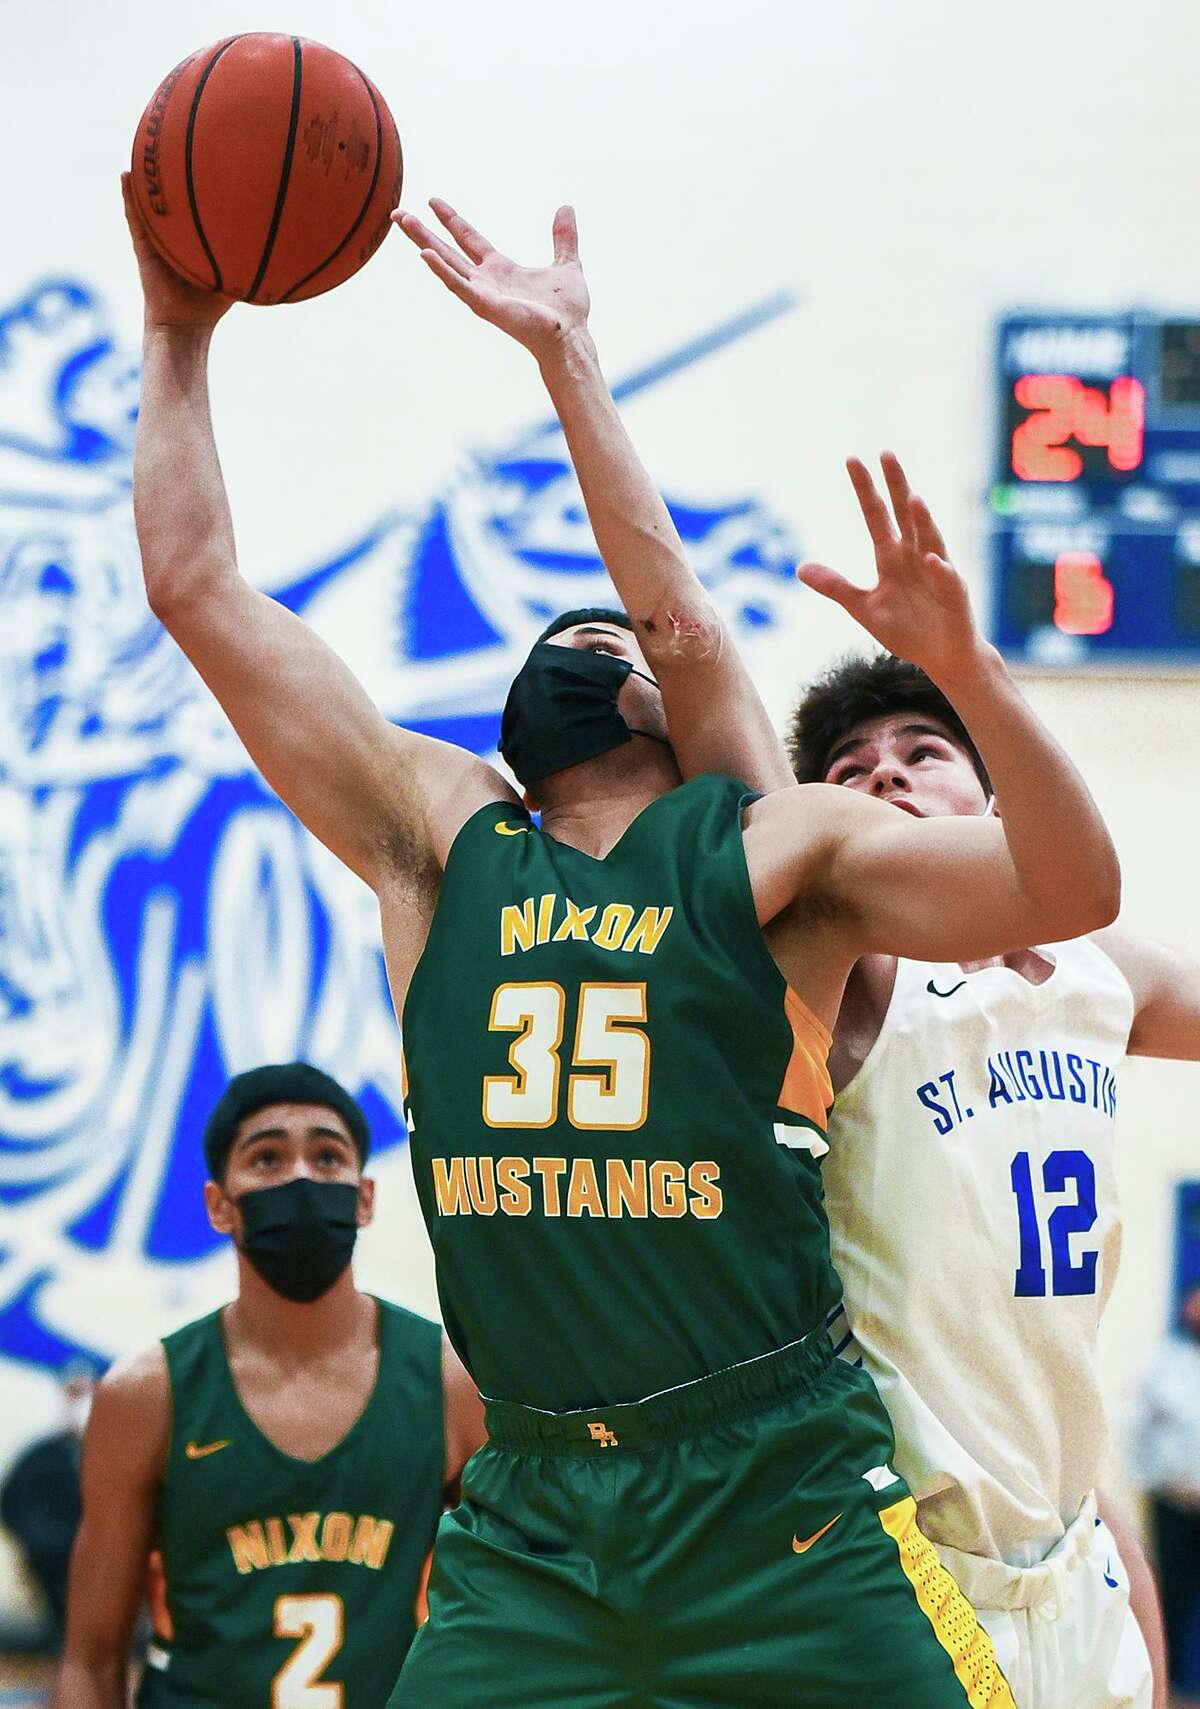 Bryan Garcia led Nixon with 25 points as the Mustangs defeat St. Augustine Tuesday.